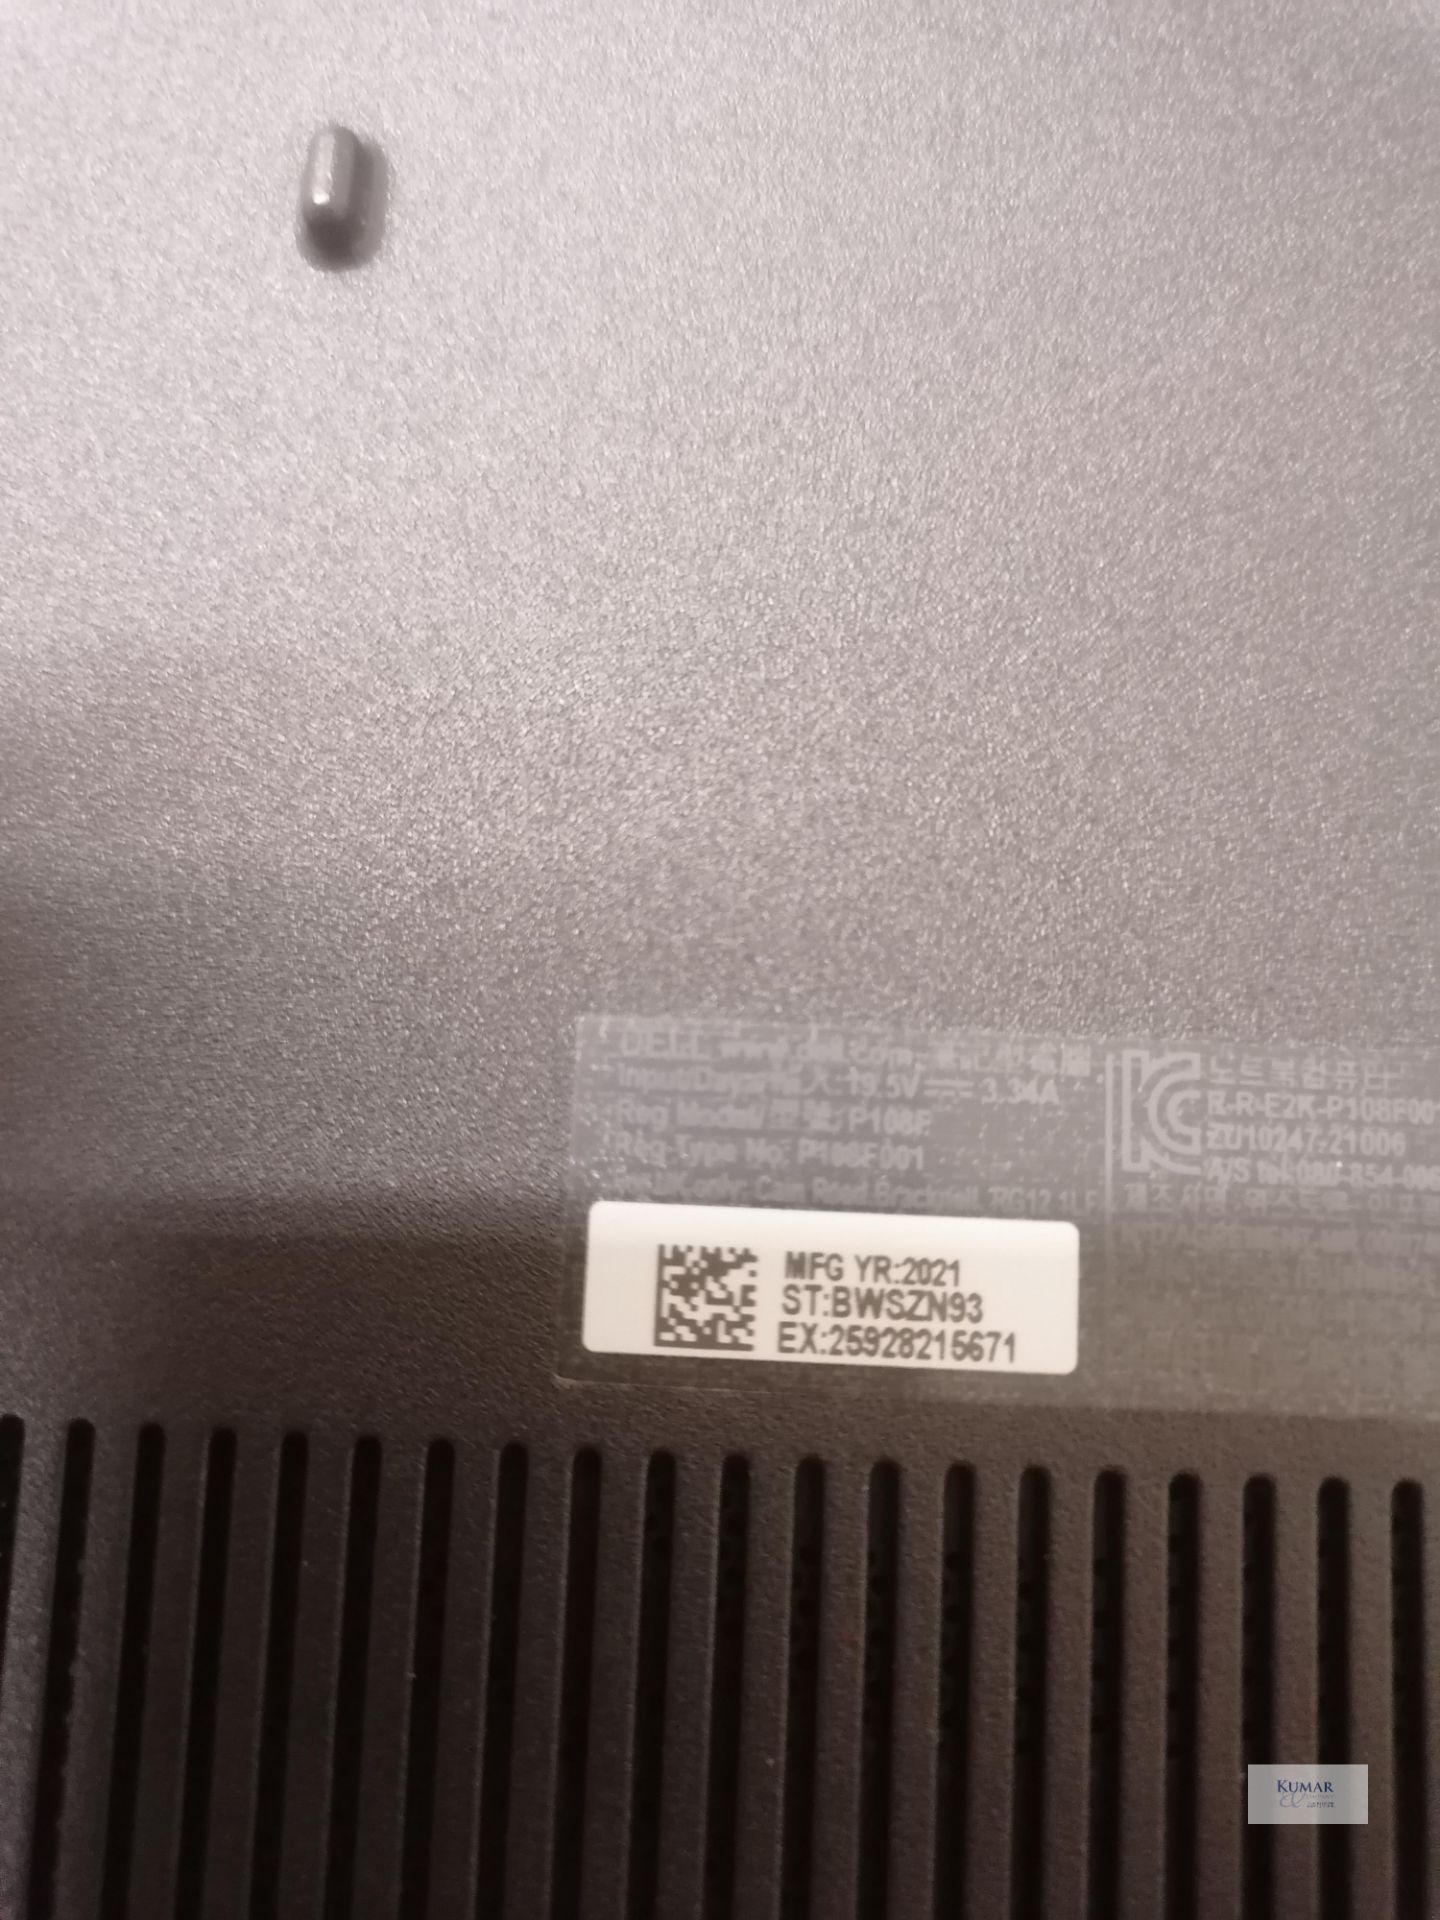 Dell Latitude 3520 Windows Pro 10 Intel Core 5 Manufactured 2021 Remainder of Manufacturer's - Image 7 of 10